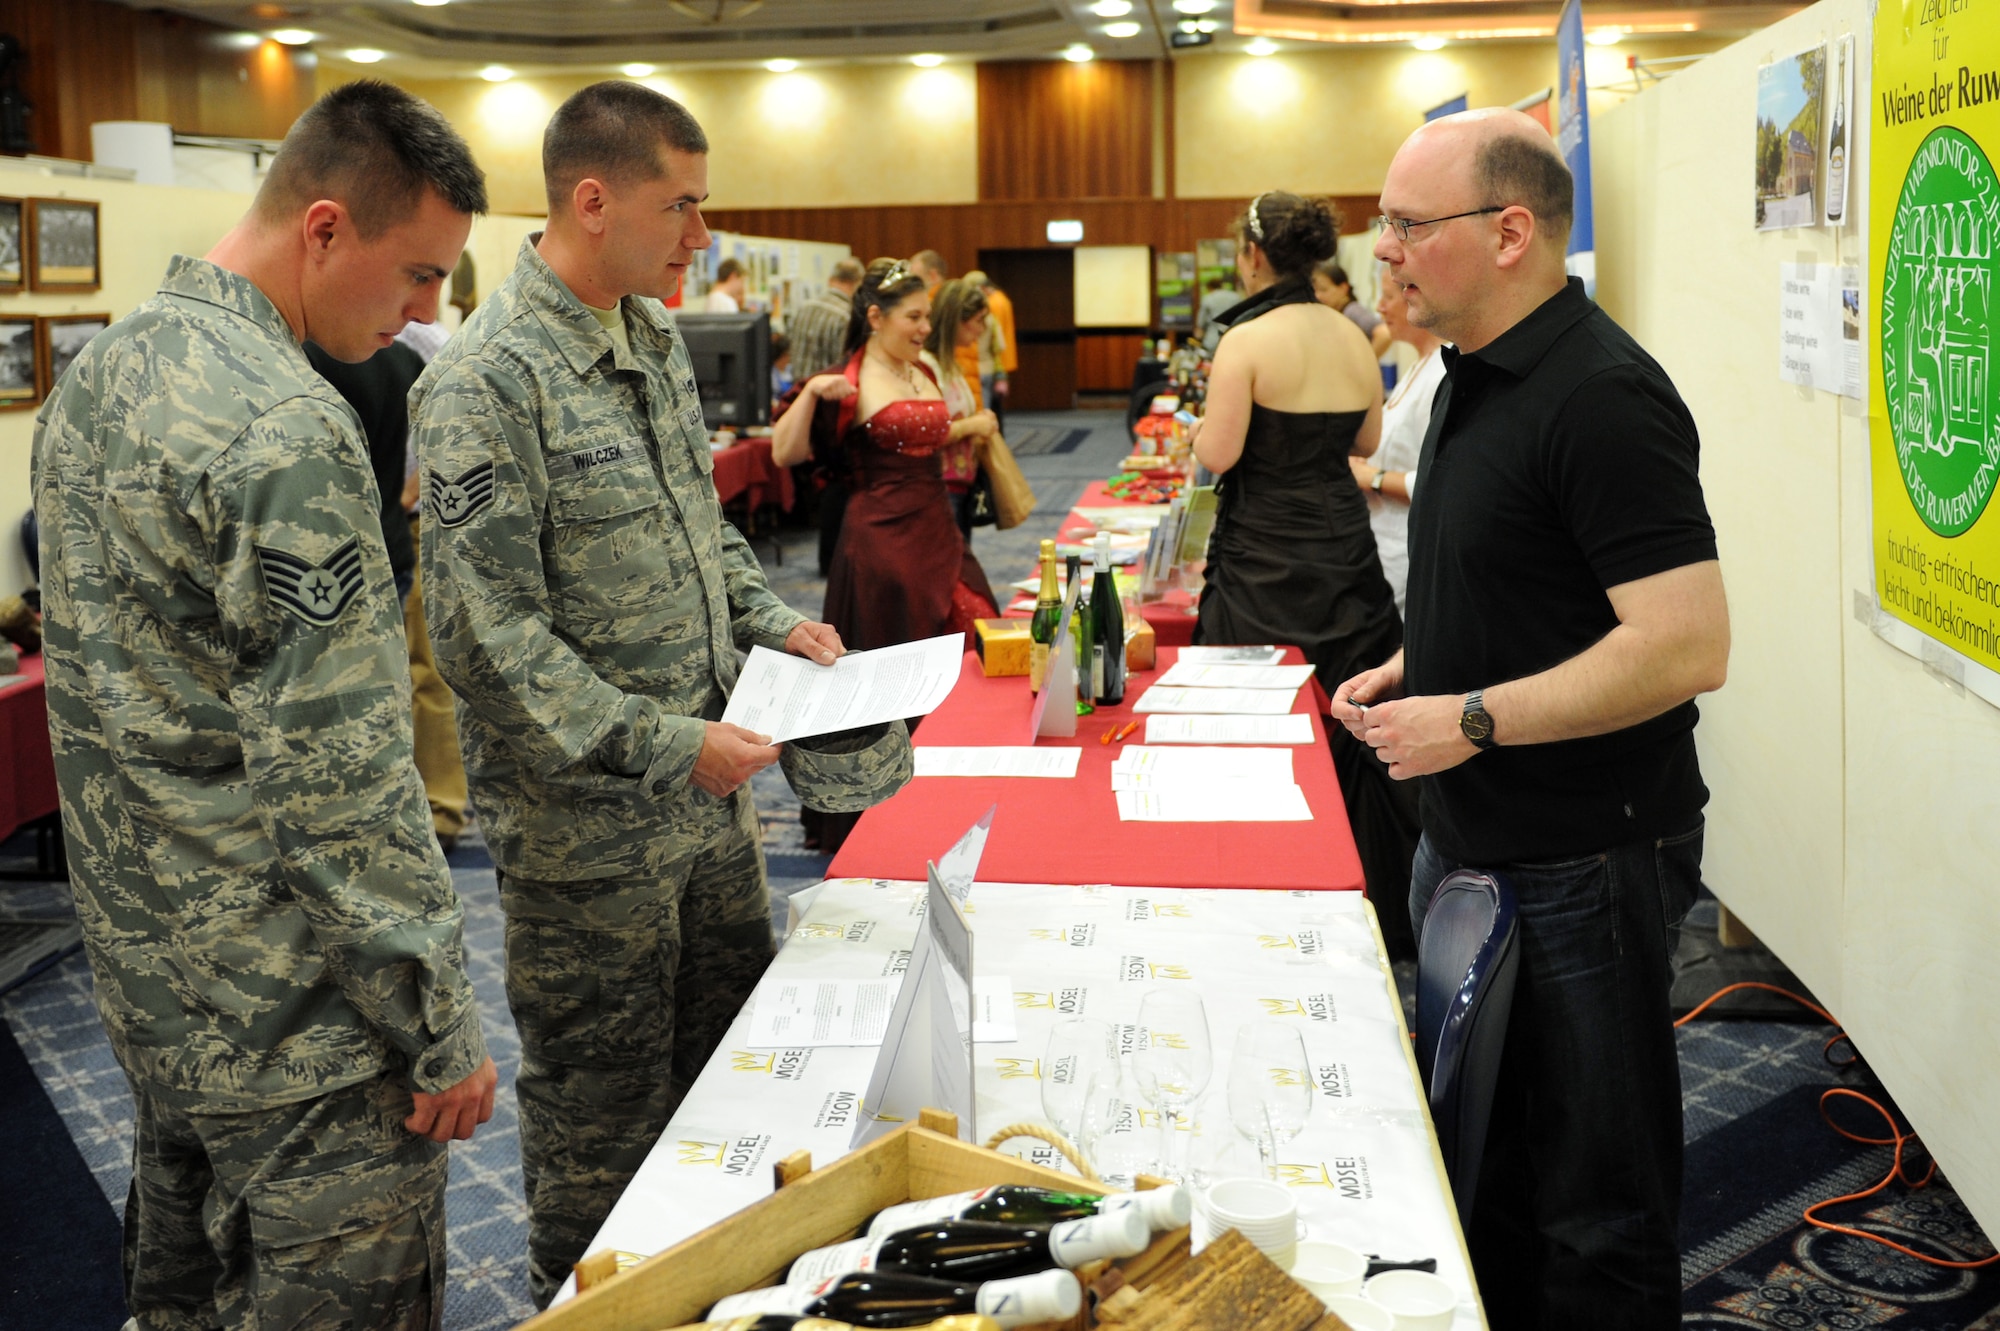 SPANGDAHLEM AIR BASE, Germany – Staff Sgt. Justin Mohr and Staff Sgt. Matthew Wilczek, 52nd Equipment Maintenance Squadron, speak with Marc Noel, a representative from the Von Nell wine-estate in Kasel, about signing up for a tour during the seventh annual Explore the Eifel fair at Club Eifel here May 11. The event had more than 200 exhibitors from Germany, Belgium and Luxembourg providing travel information on hiking trips and hot-air balloon rides, prizes, free samples, wine tastings, and more. This event gave attendees the chance to sign up for tours and adventures taking place May 18-20 in the Eifel area. (U.S. Air Force photo by Senior Airman Christopher Toon/Released)